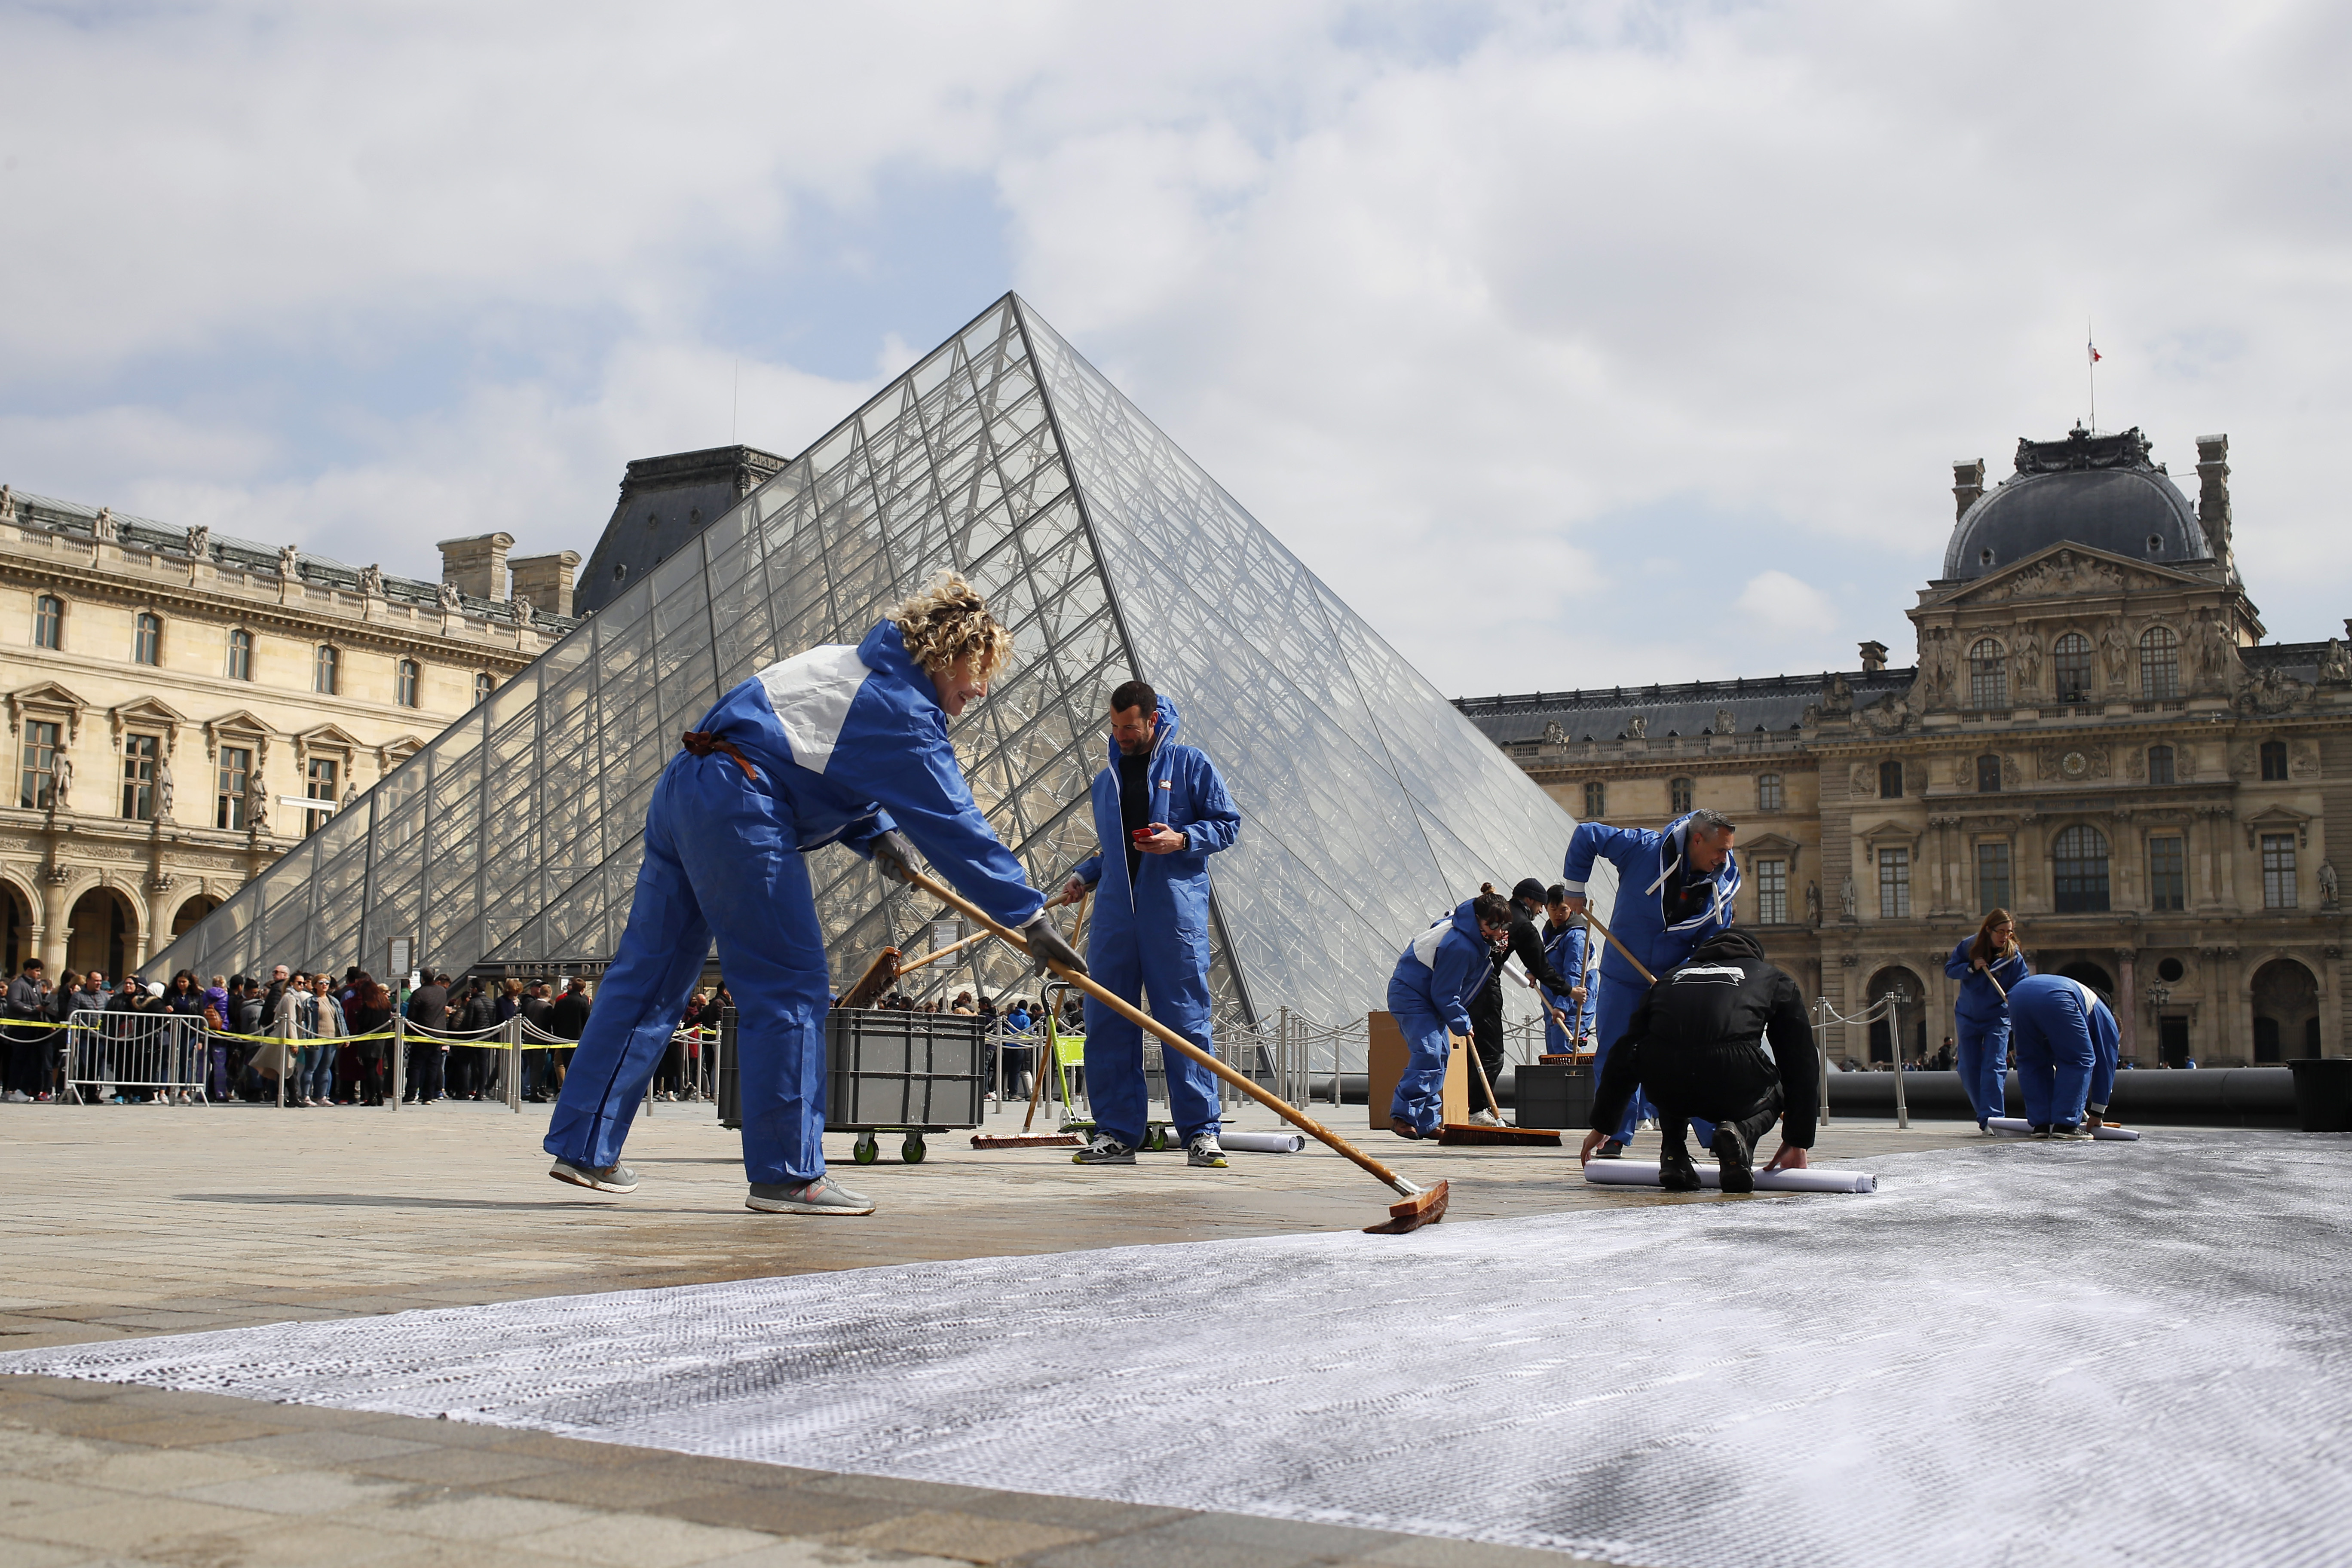 French street artist JR volunteers work in the courtyard of the Louvre Museum near the glass pyramid designed by architect Leoh Ming Pei, in Paris, Wednesday, March 27, 2019 as the Louvre Museum celebrates the 30th anniversary of its glass pyramid. JR project is a giant collage of the pyramid to bring it out of the ground by revealing the foundations of the Napoleon courtyard where it is erected. (AP Photo/Francois Mori)